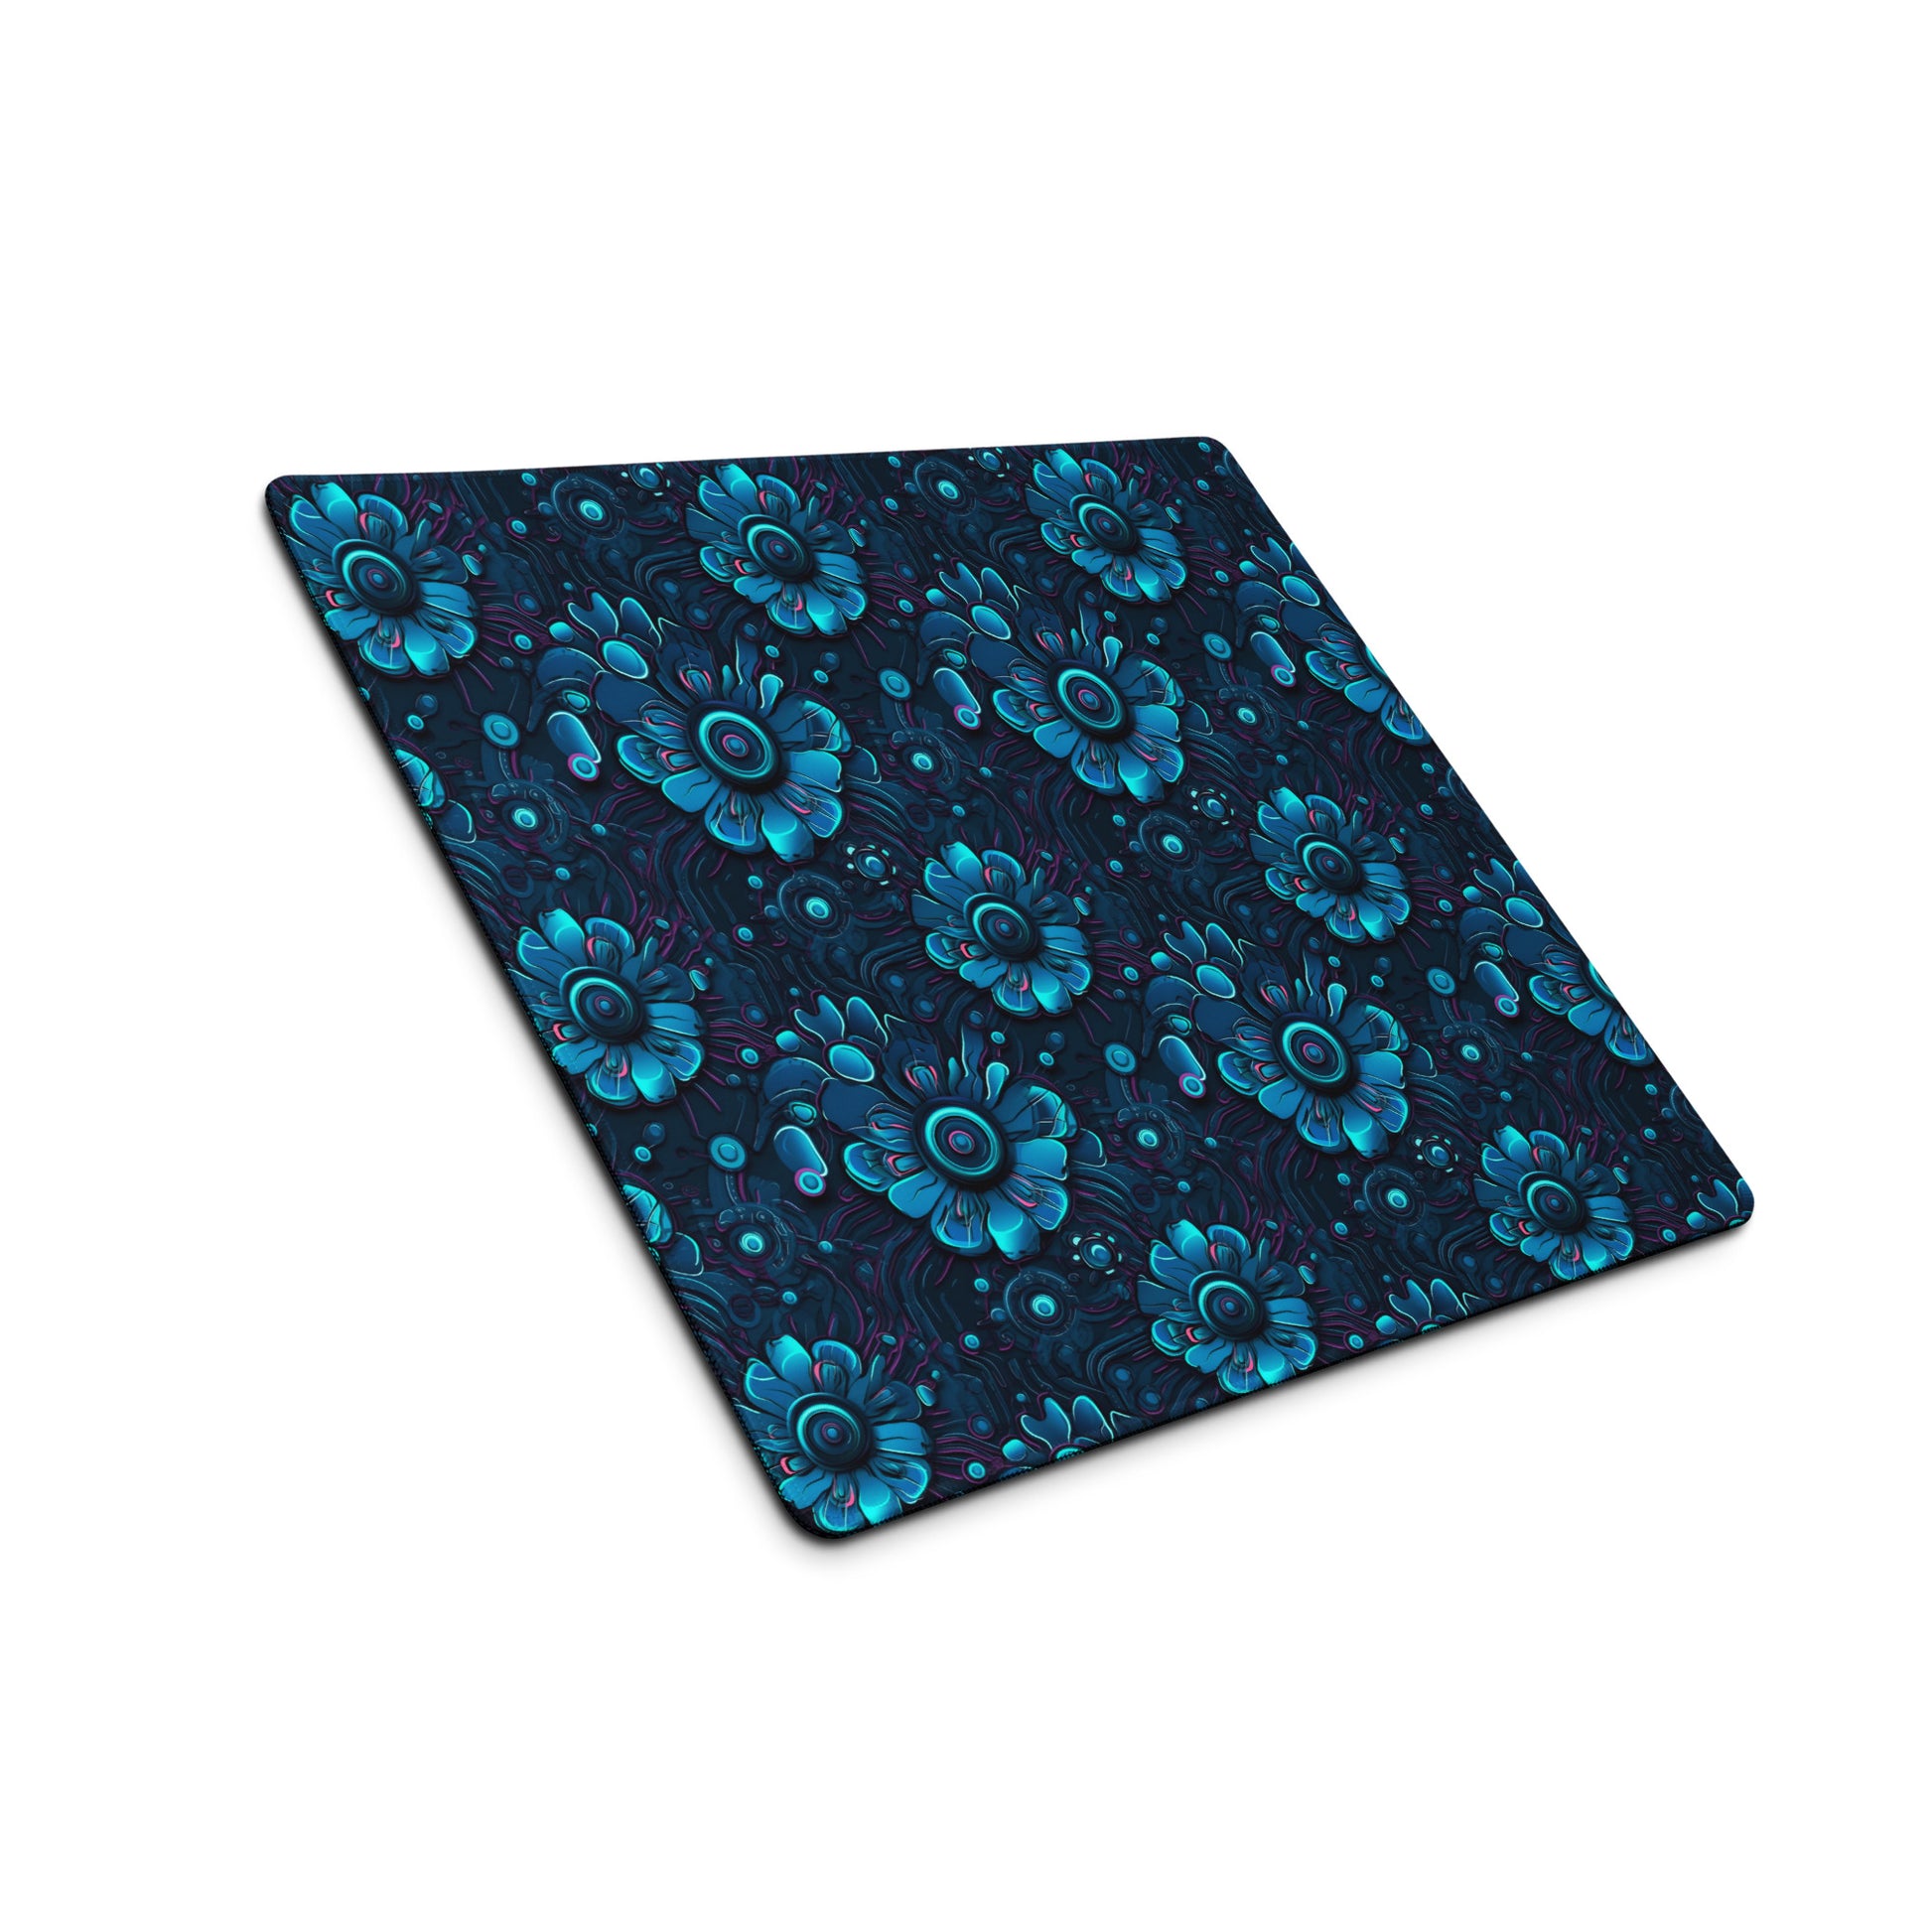 A 18" x 16" desk pad with a blue robotic floral pattern sitting at an angle.